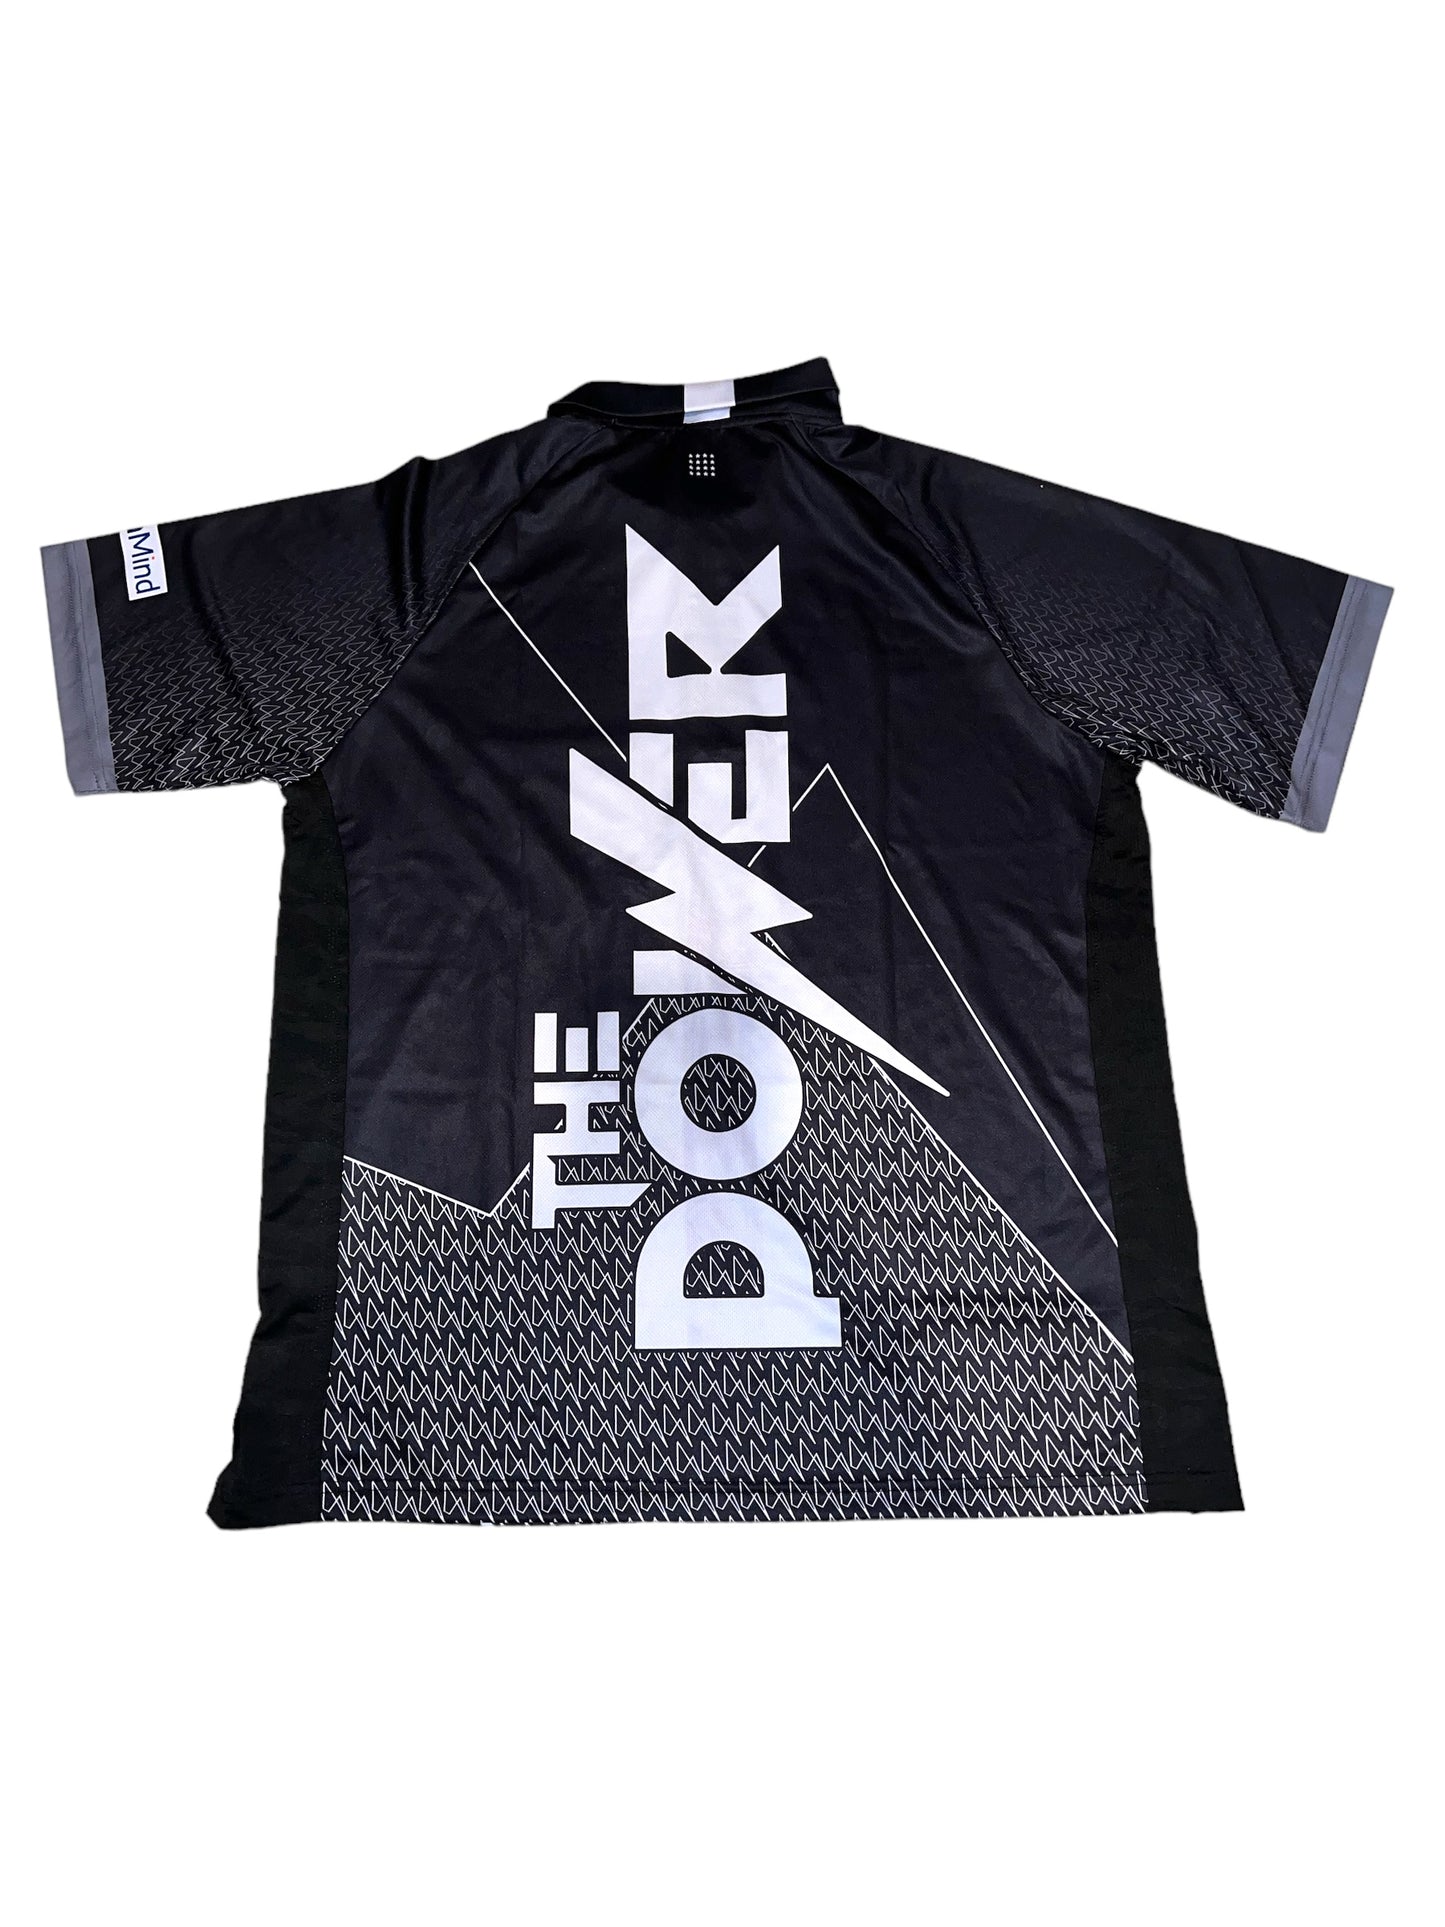 Phil ‘The Power’ Taylor Signed WSDT Target Coolplay Darts Shirt